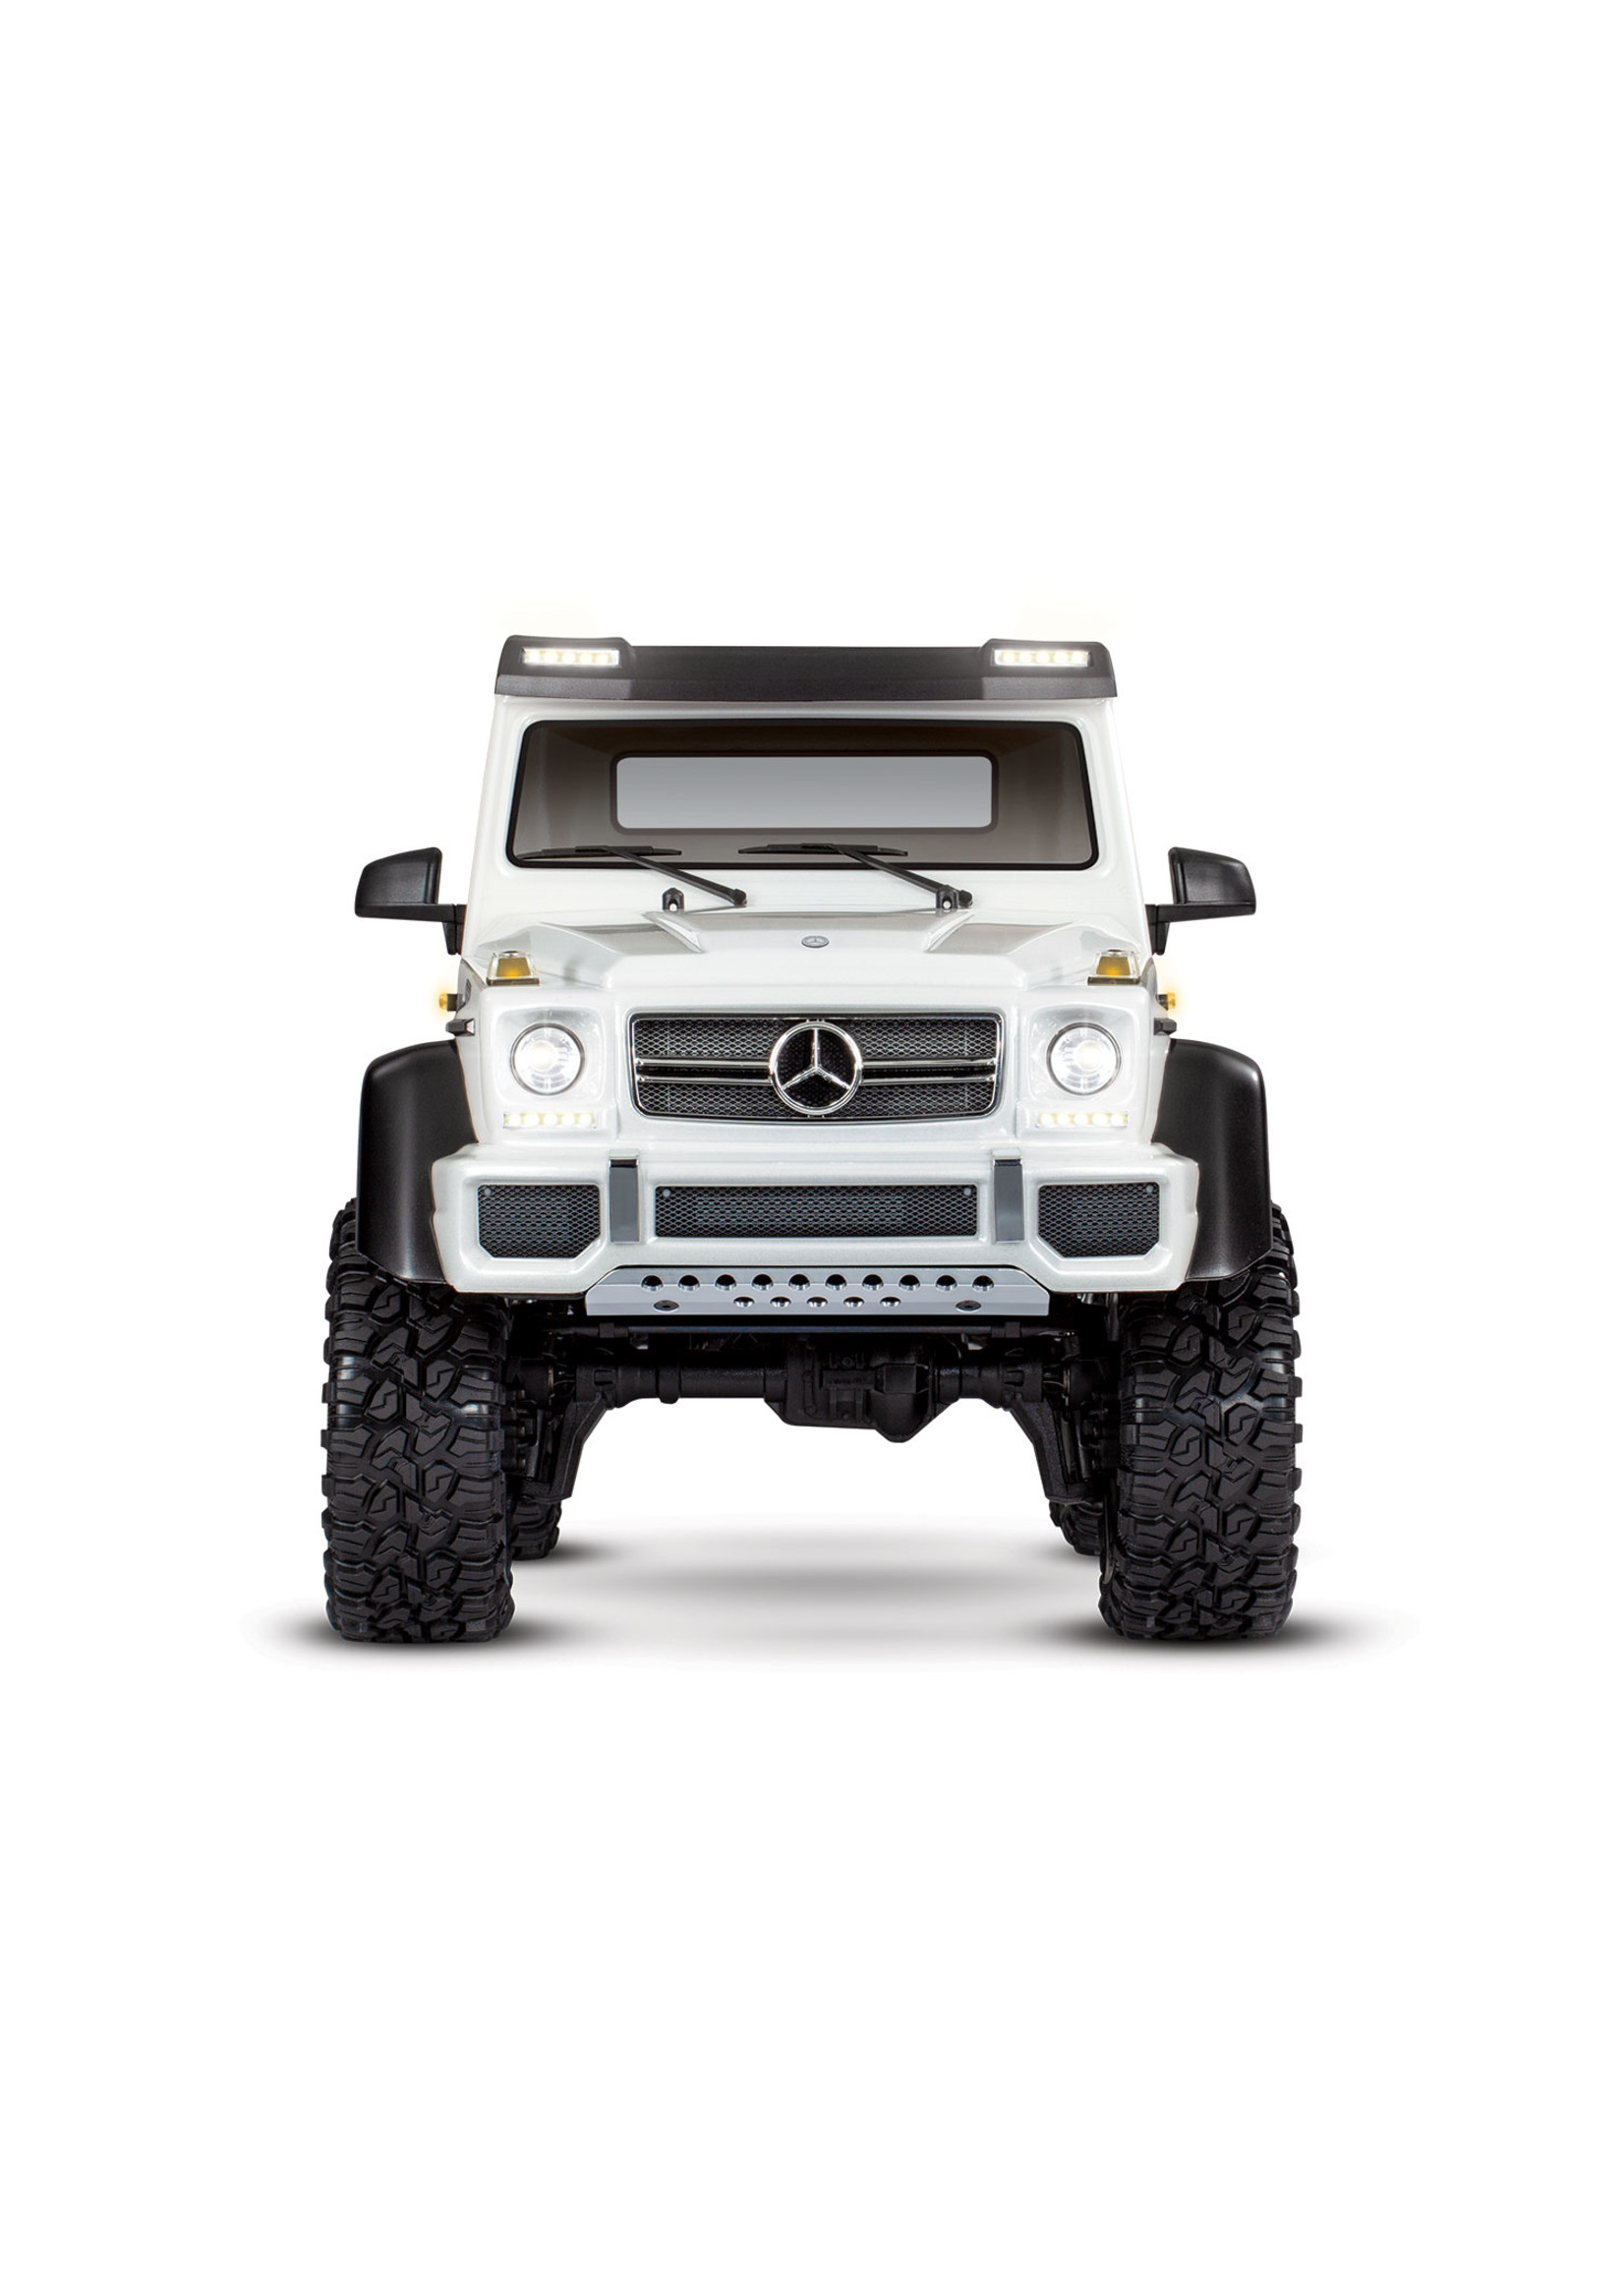 Traxxas 1/10 Mercedes-Benz G 63 AMG 6x6 RTR Scale and Trail Crawler - White